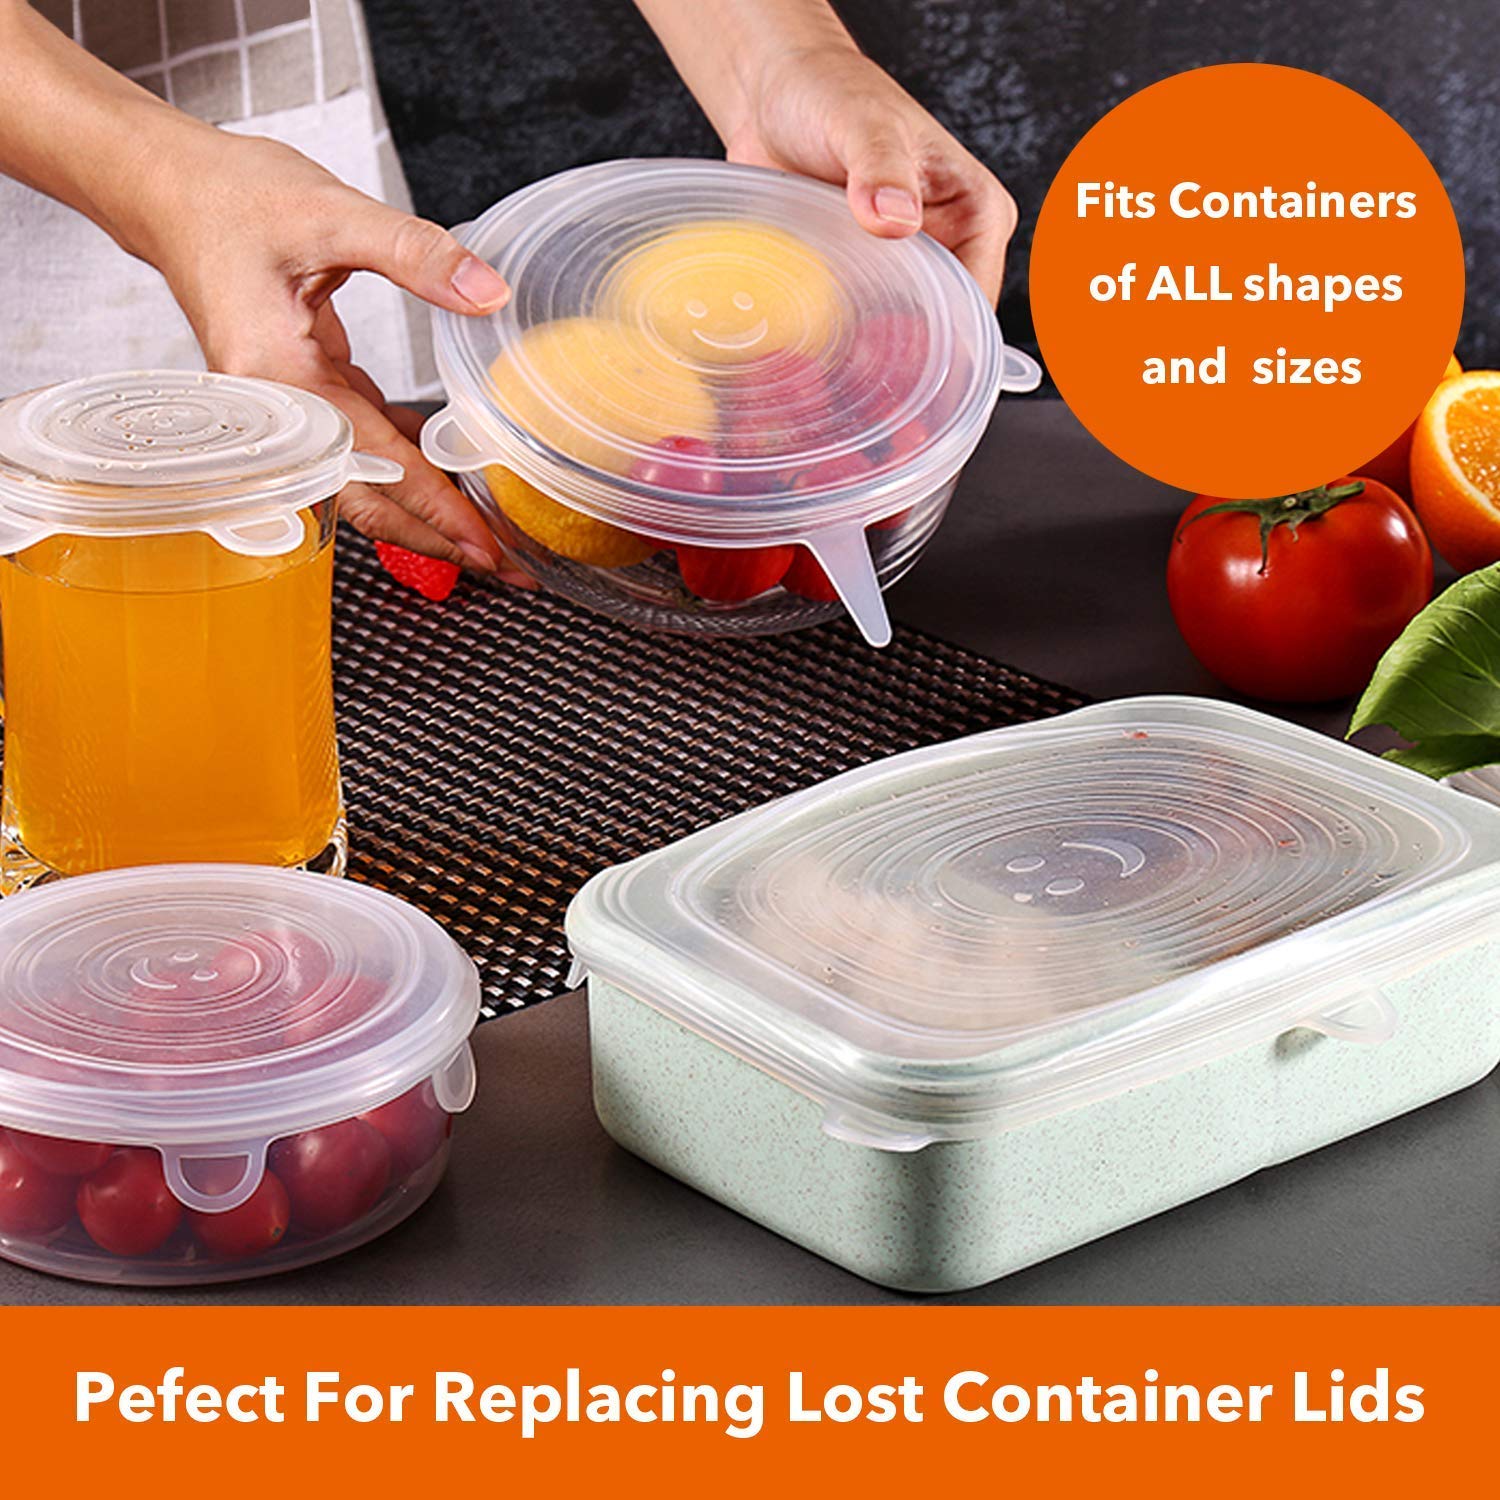 Resuable silicon stretch lids - SET OF 6 (PREMIUM QUALITY)